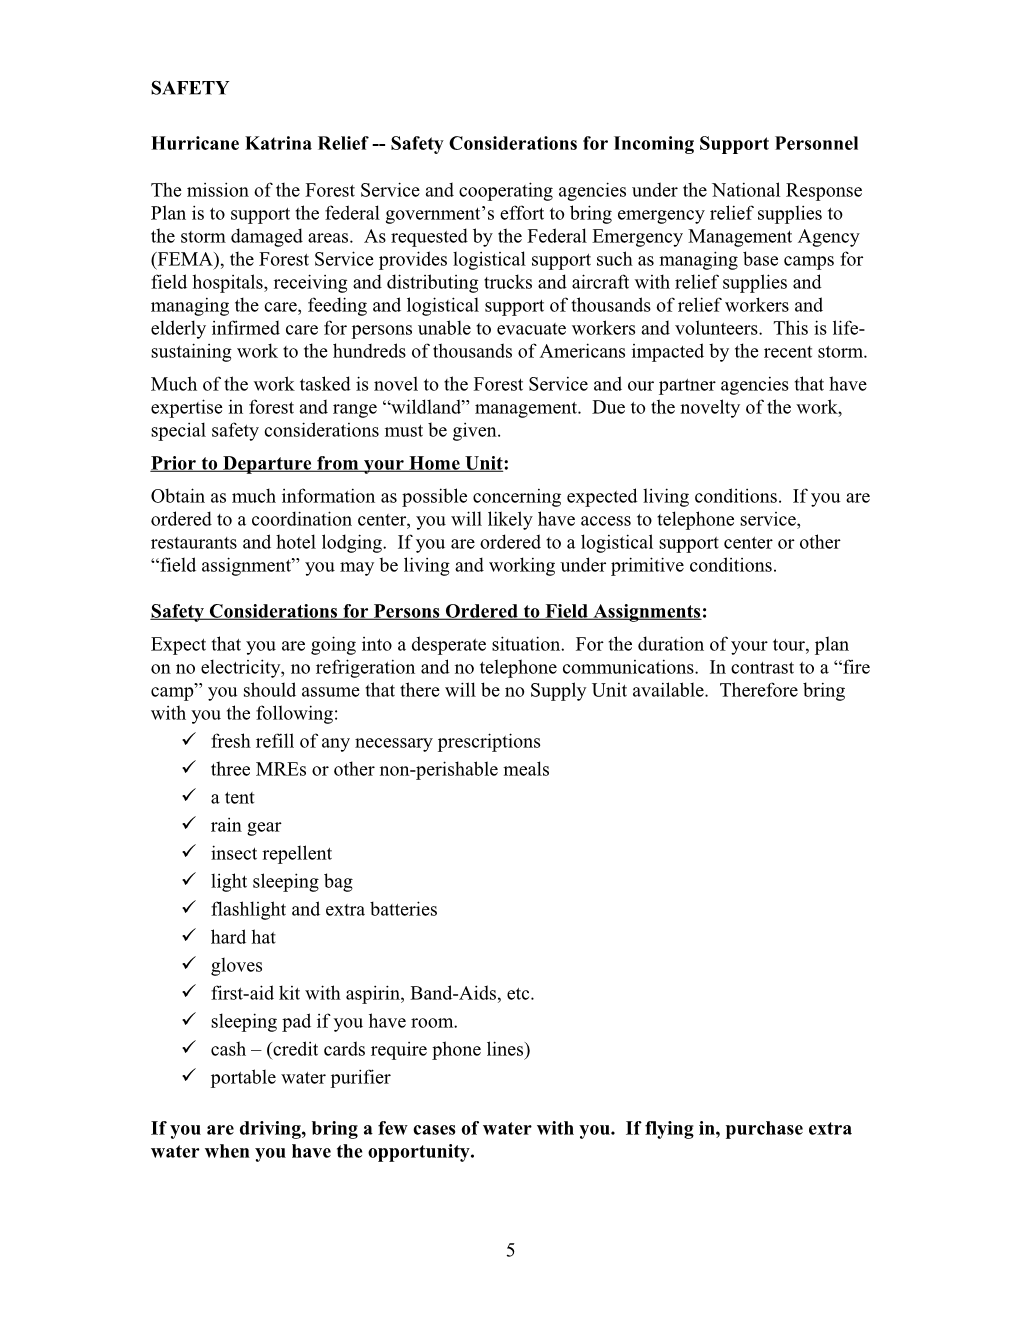 Hurricane Katrina Relief Safety Considerations for Incoming Support Personnel